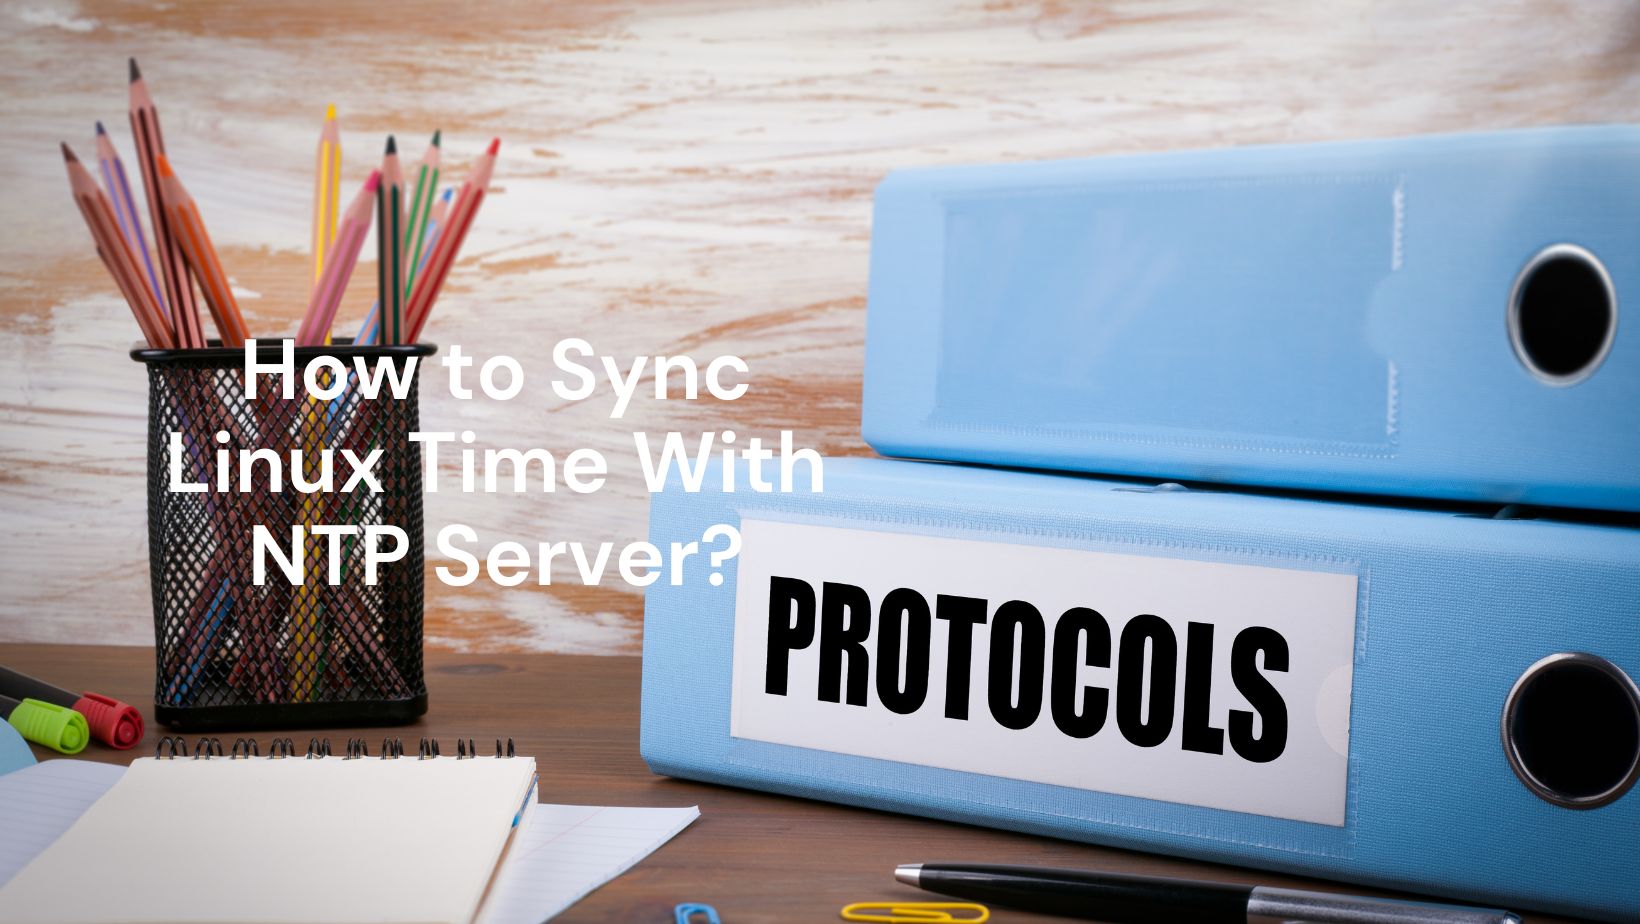 How to Sync Linux Time With NTP Server?